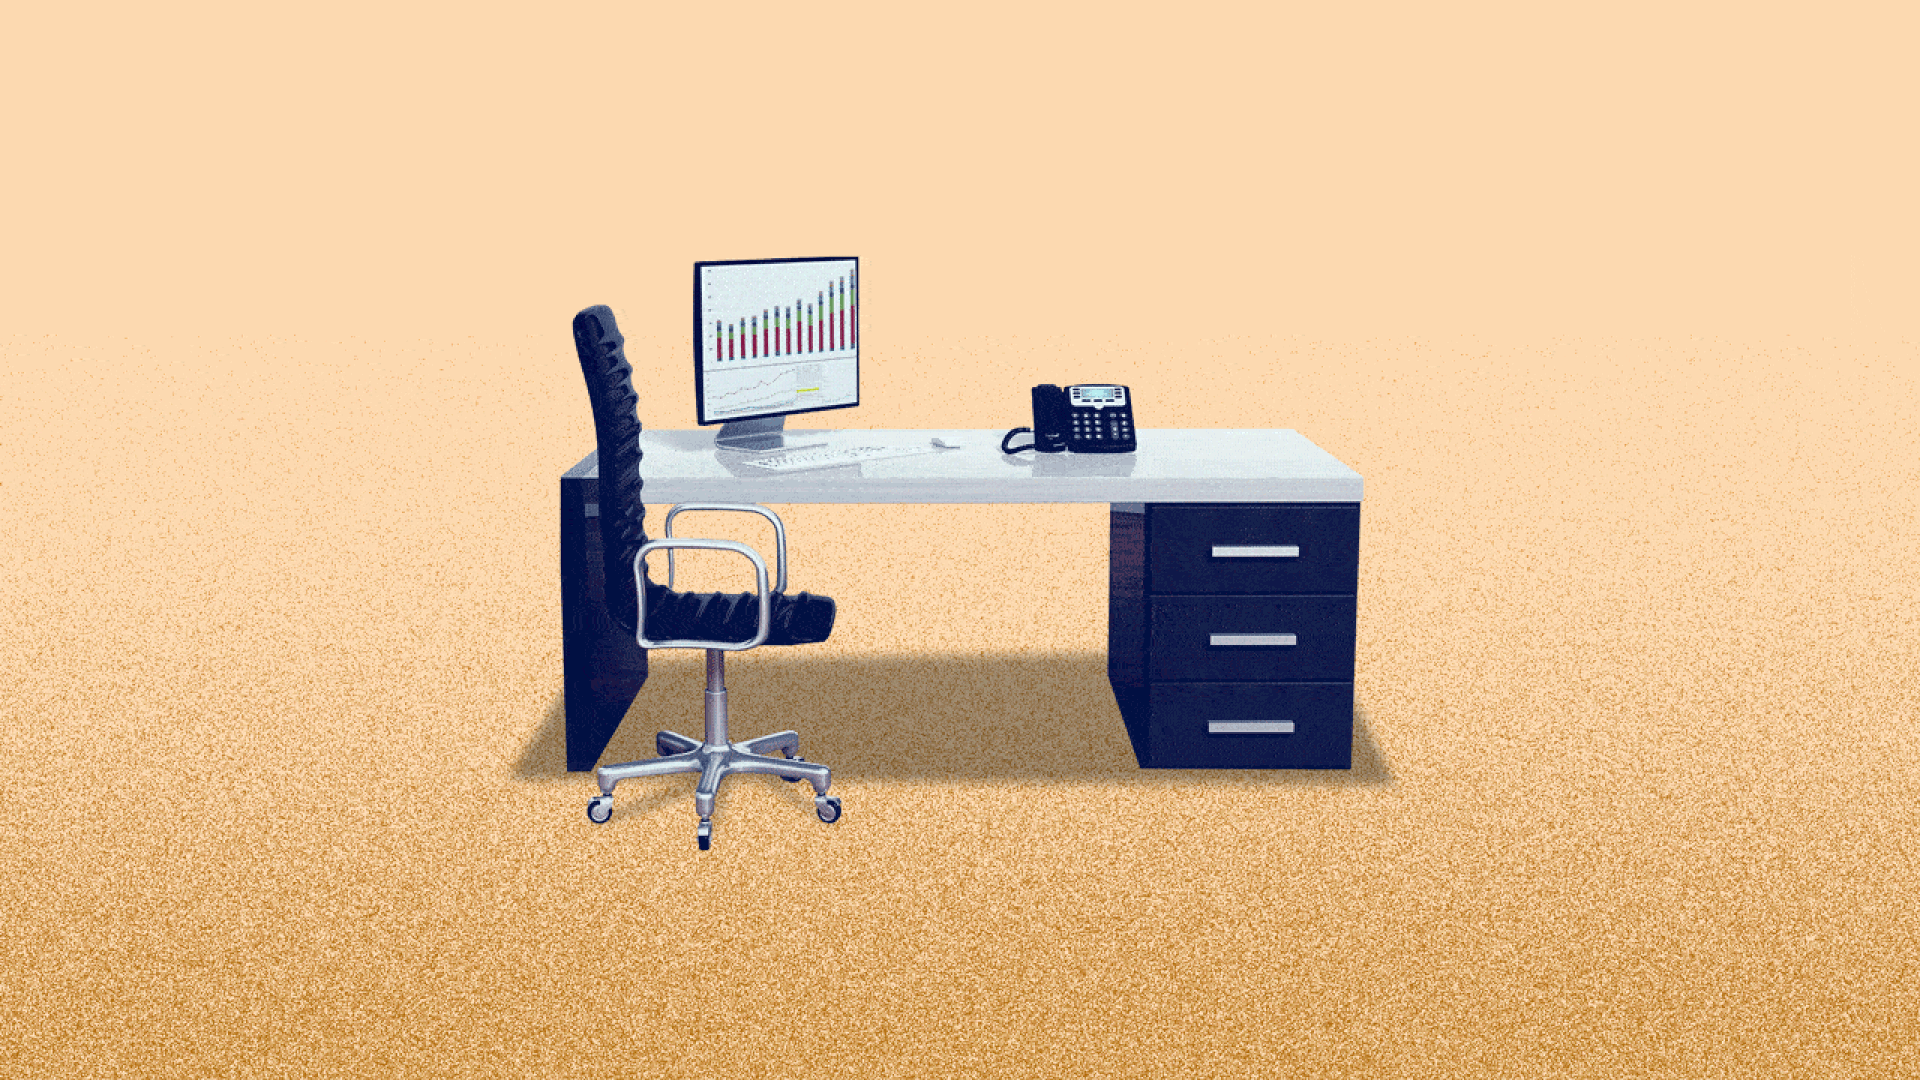 Animated GIF of a desk out in the desert with a tumbleweed blowing by